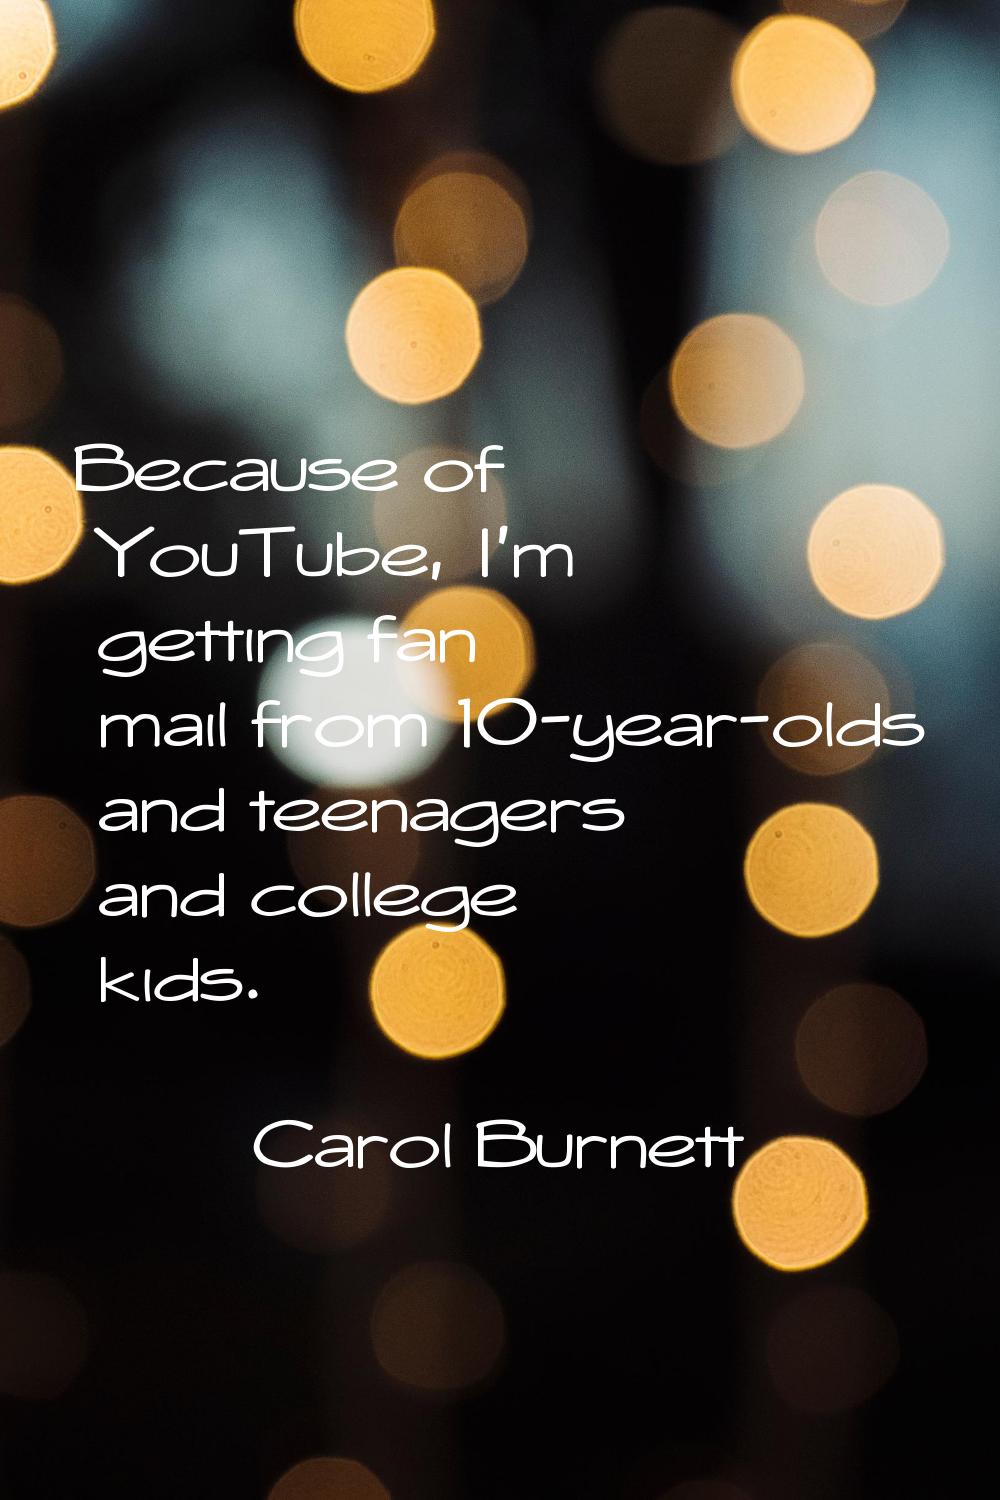 Because of YouTube, I'm getting fan mail from 10-year-olds and teenagers and college kids.